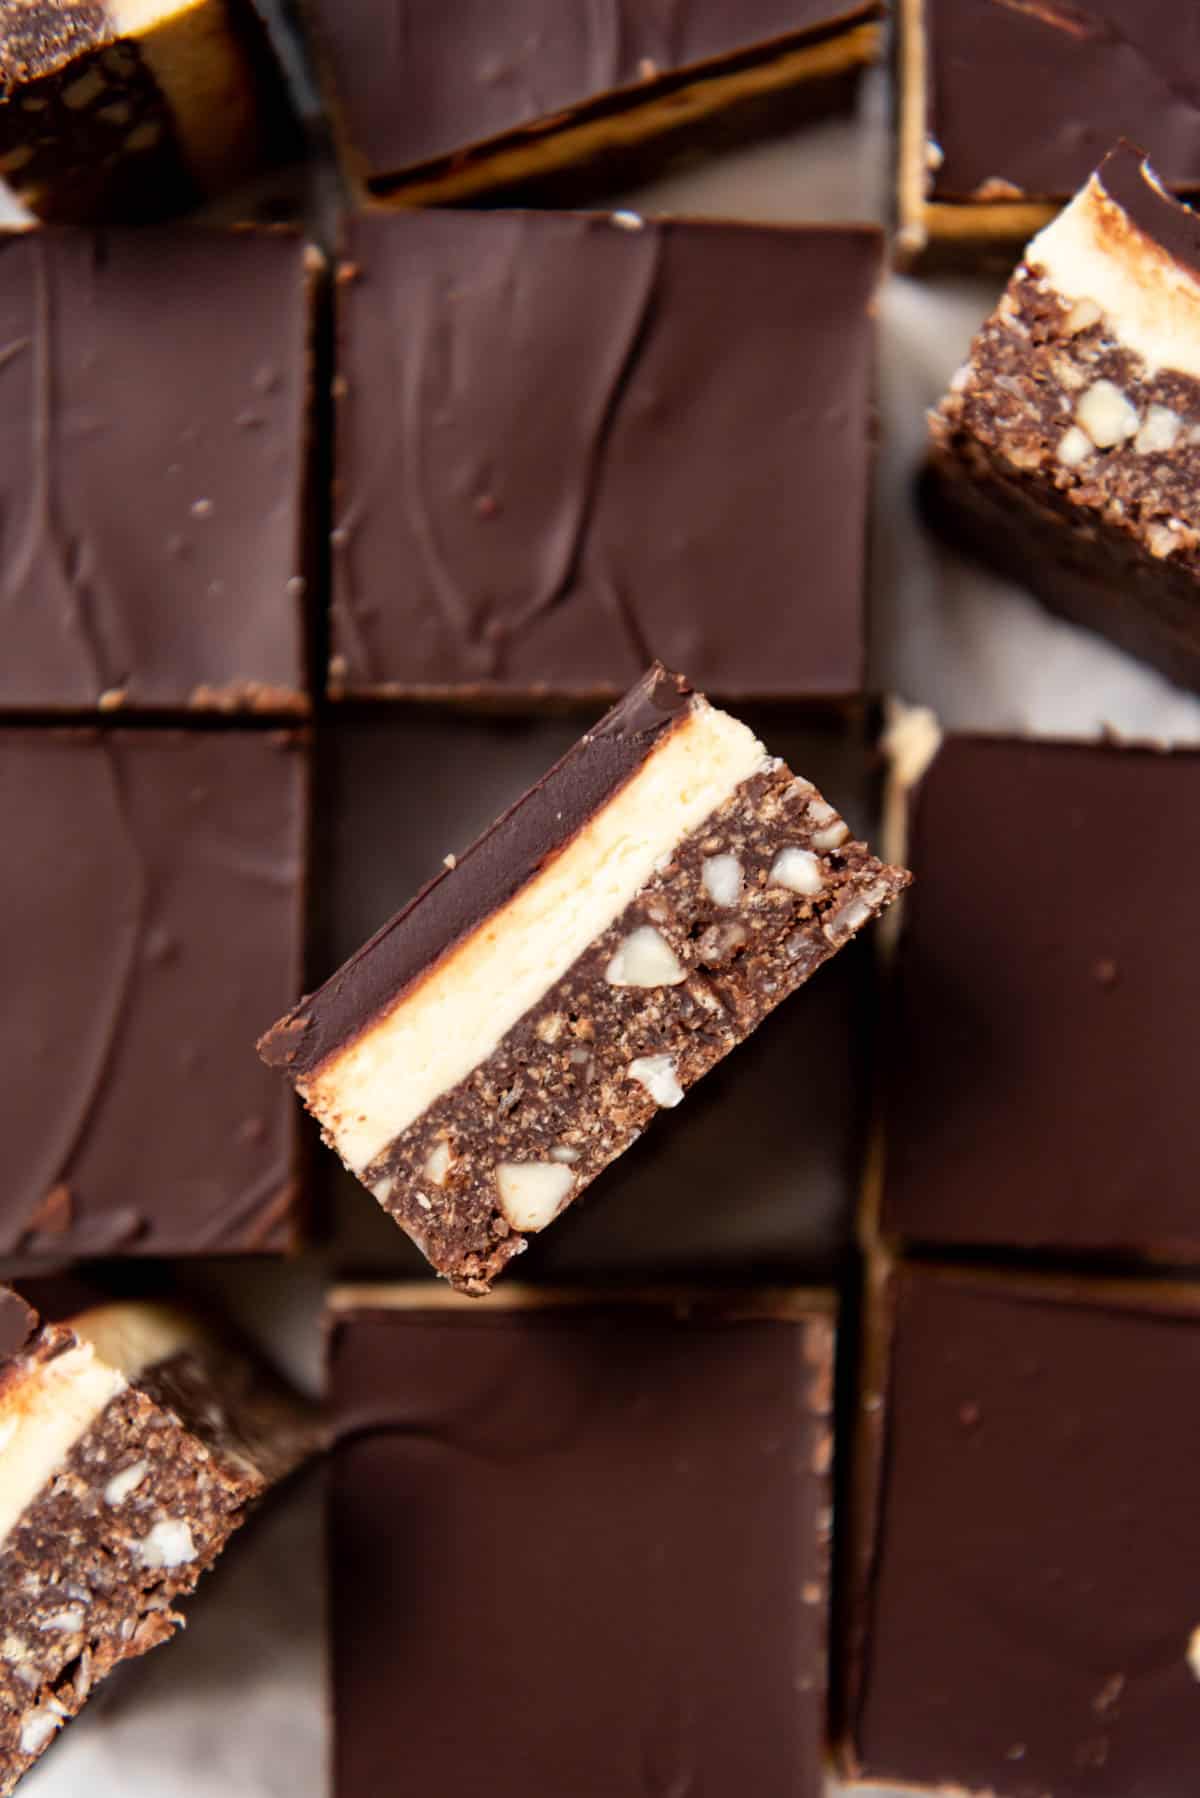 A close image of a nanaimo bar turned on its side to show the layers.